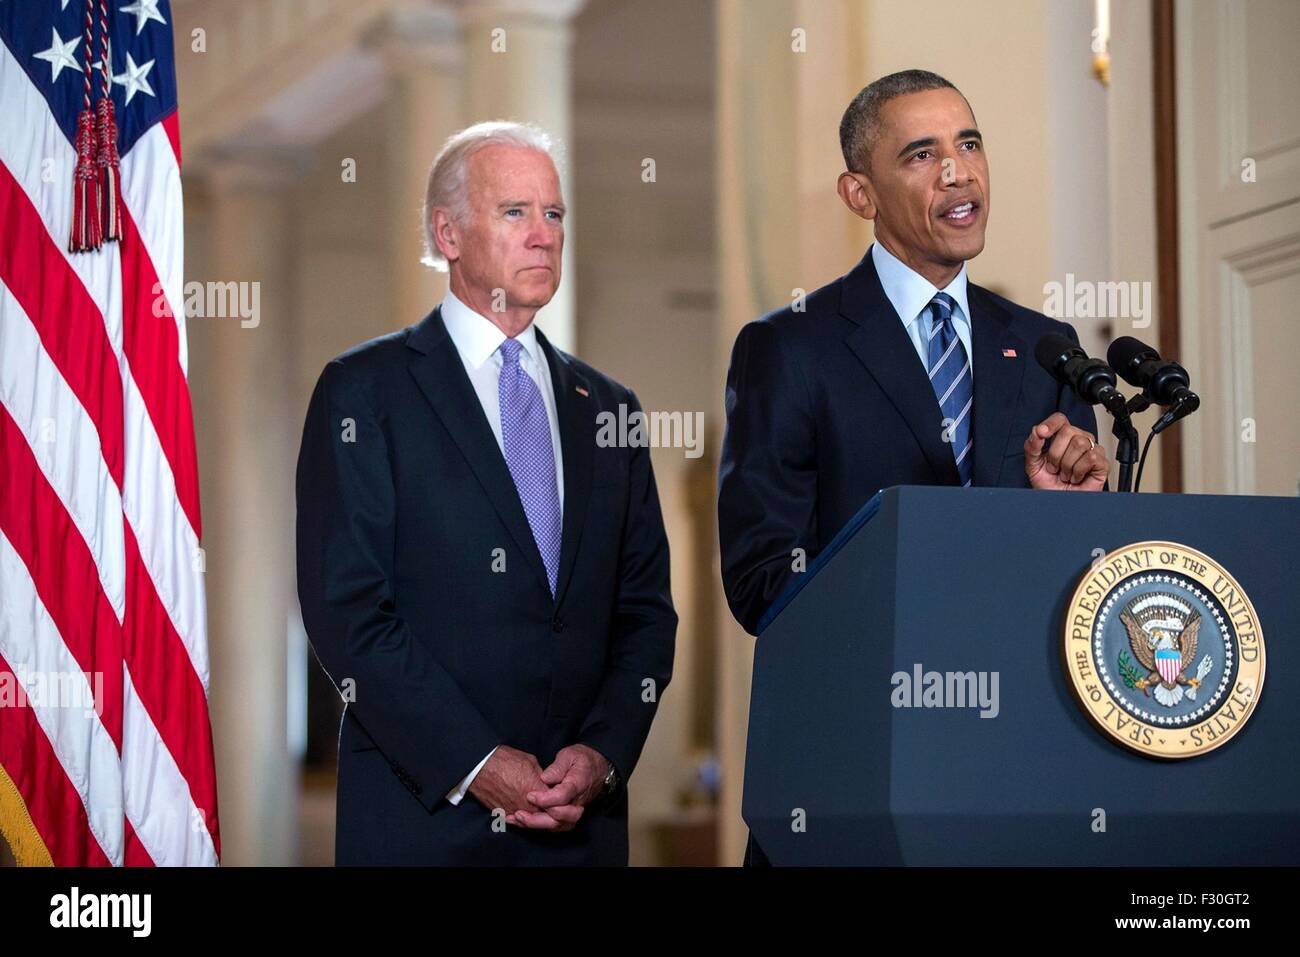 U.S. President Barack Obama discusses the Iranian nuclear agreement as Vice President Joe Biden looks on in the East Room of the White House August 20, 2015 in Washington, DC. Stock Photo